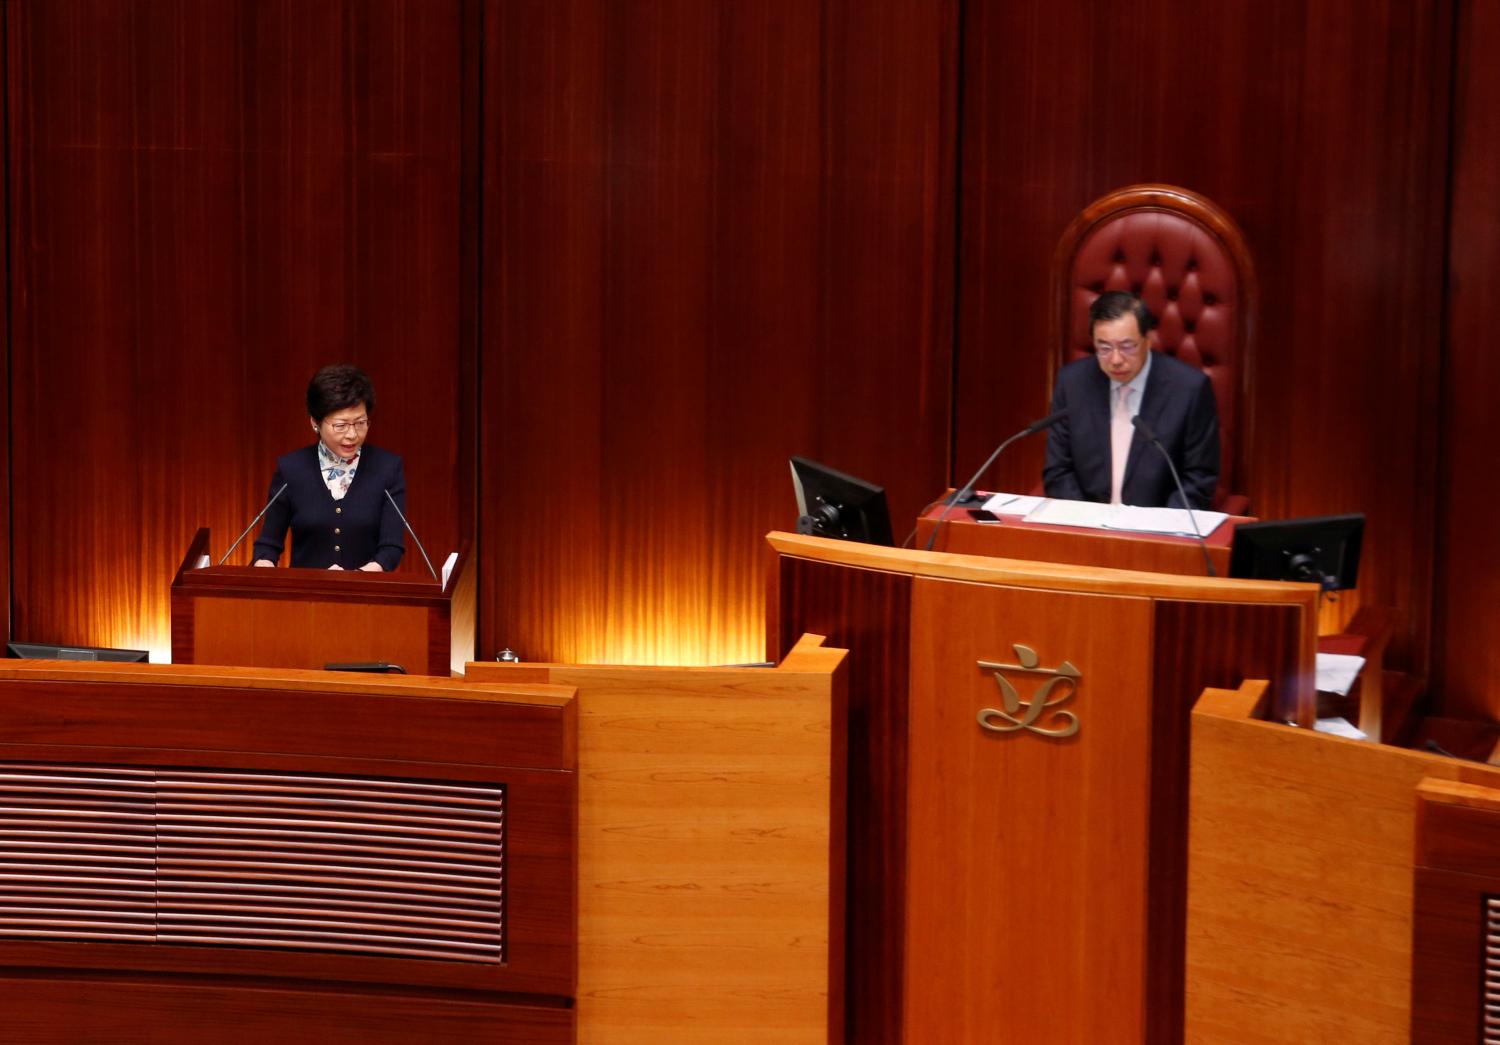 Hong Kong Chief Executive Carrie Lam (L) speaks beside Legislative Council President Andrew Leung during her first Question and Answer session at the Legislative Council in Hong Kong, China, July 5, 2017.